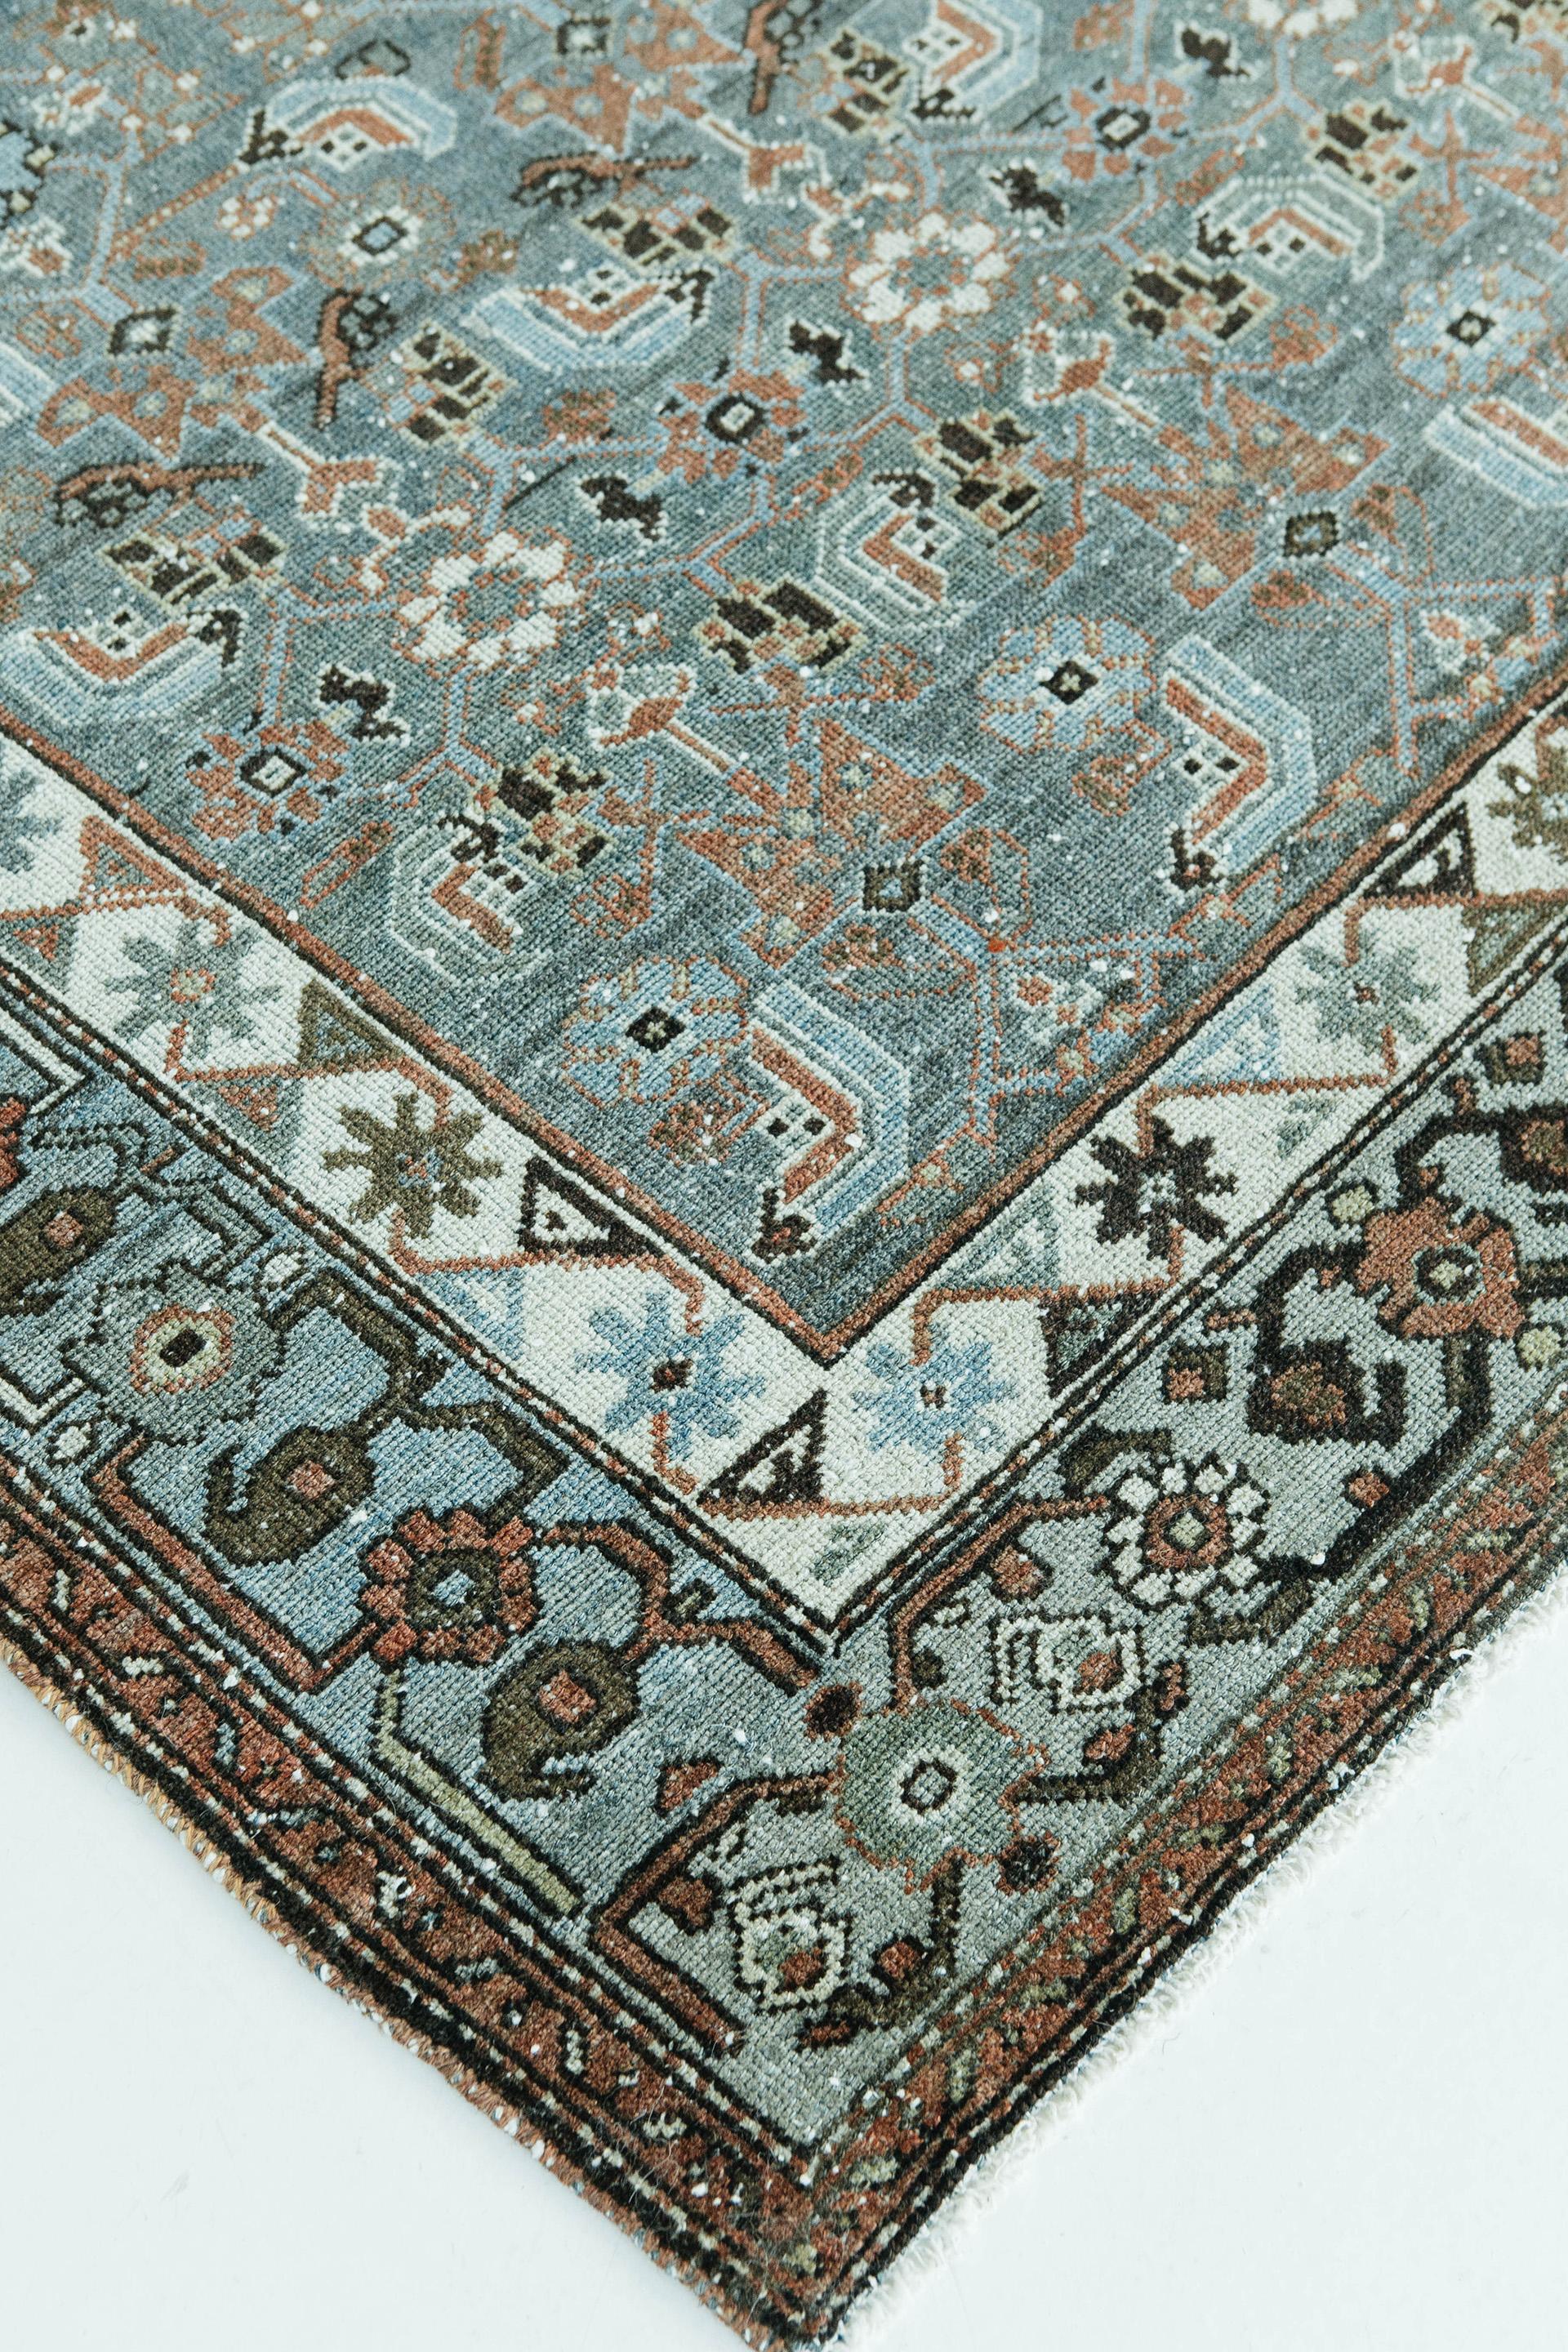 Blue abrash ground with all-over lattice design of geometricized floral elements in red, brown and ivory tones. A similarly stylized border of rosettes and vines frames the piece. This is a stunning vintage Malayer from northwestern Iran.

Rug